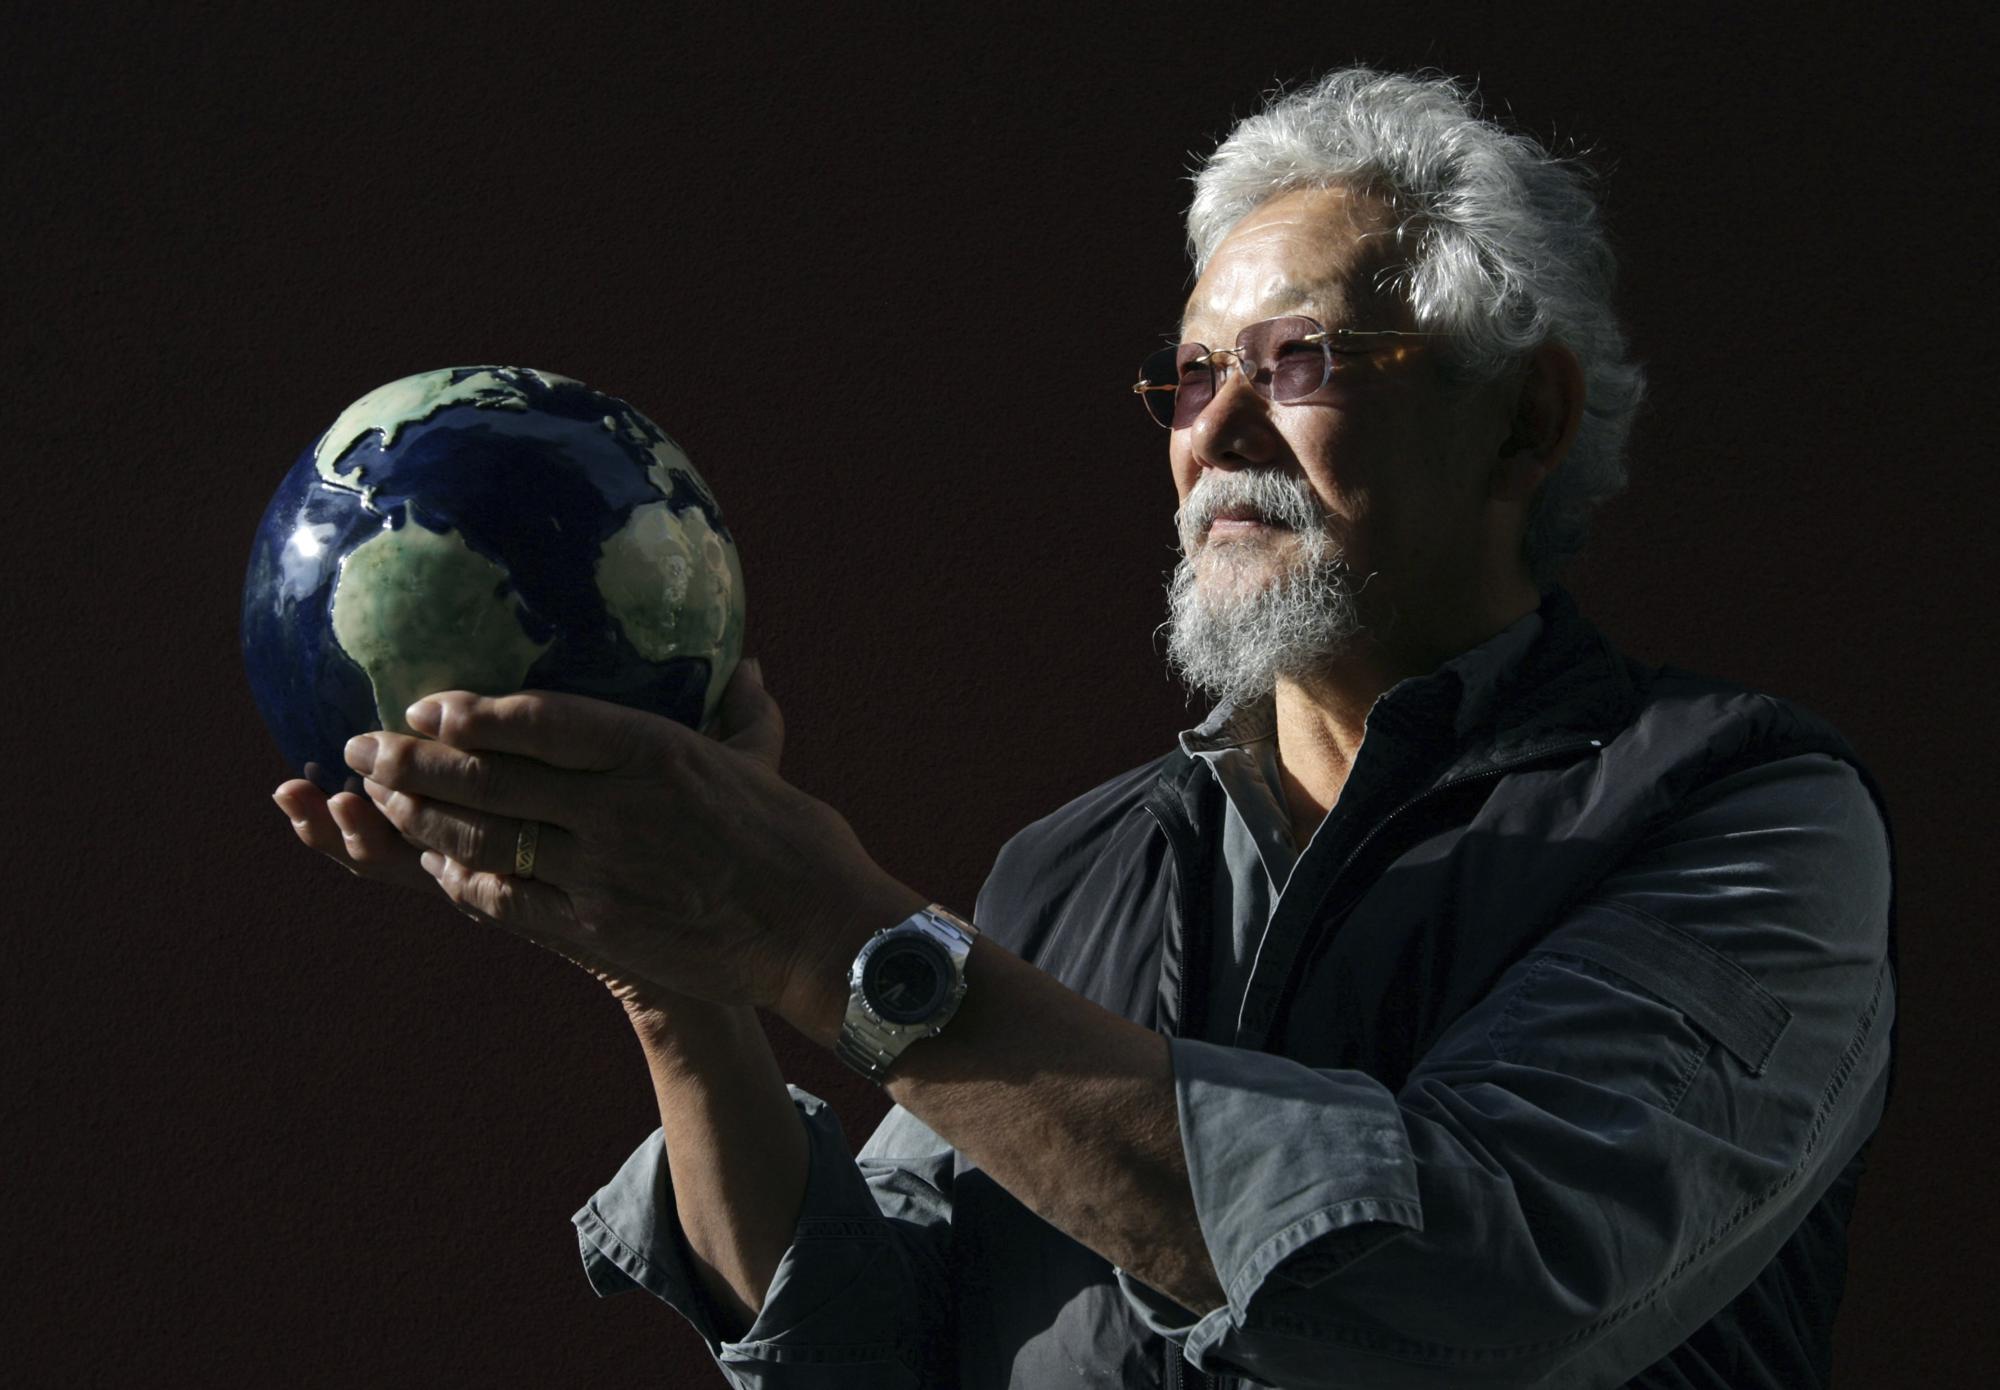 FILE - Environmentalist David Suzuki poses for a photograph in Vancouver, B.C., Nov. 4, 2008. For more than half a century, Suzuki has advocated for Earth, but looking back he fears "the environmental movement has fundamentally failed." And what's worse, he says, "my message at the end of my career is that we've run out of time."(AP Photo/The Canadian Press, Darryl Dyck, File)